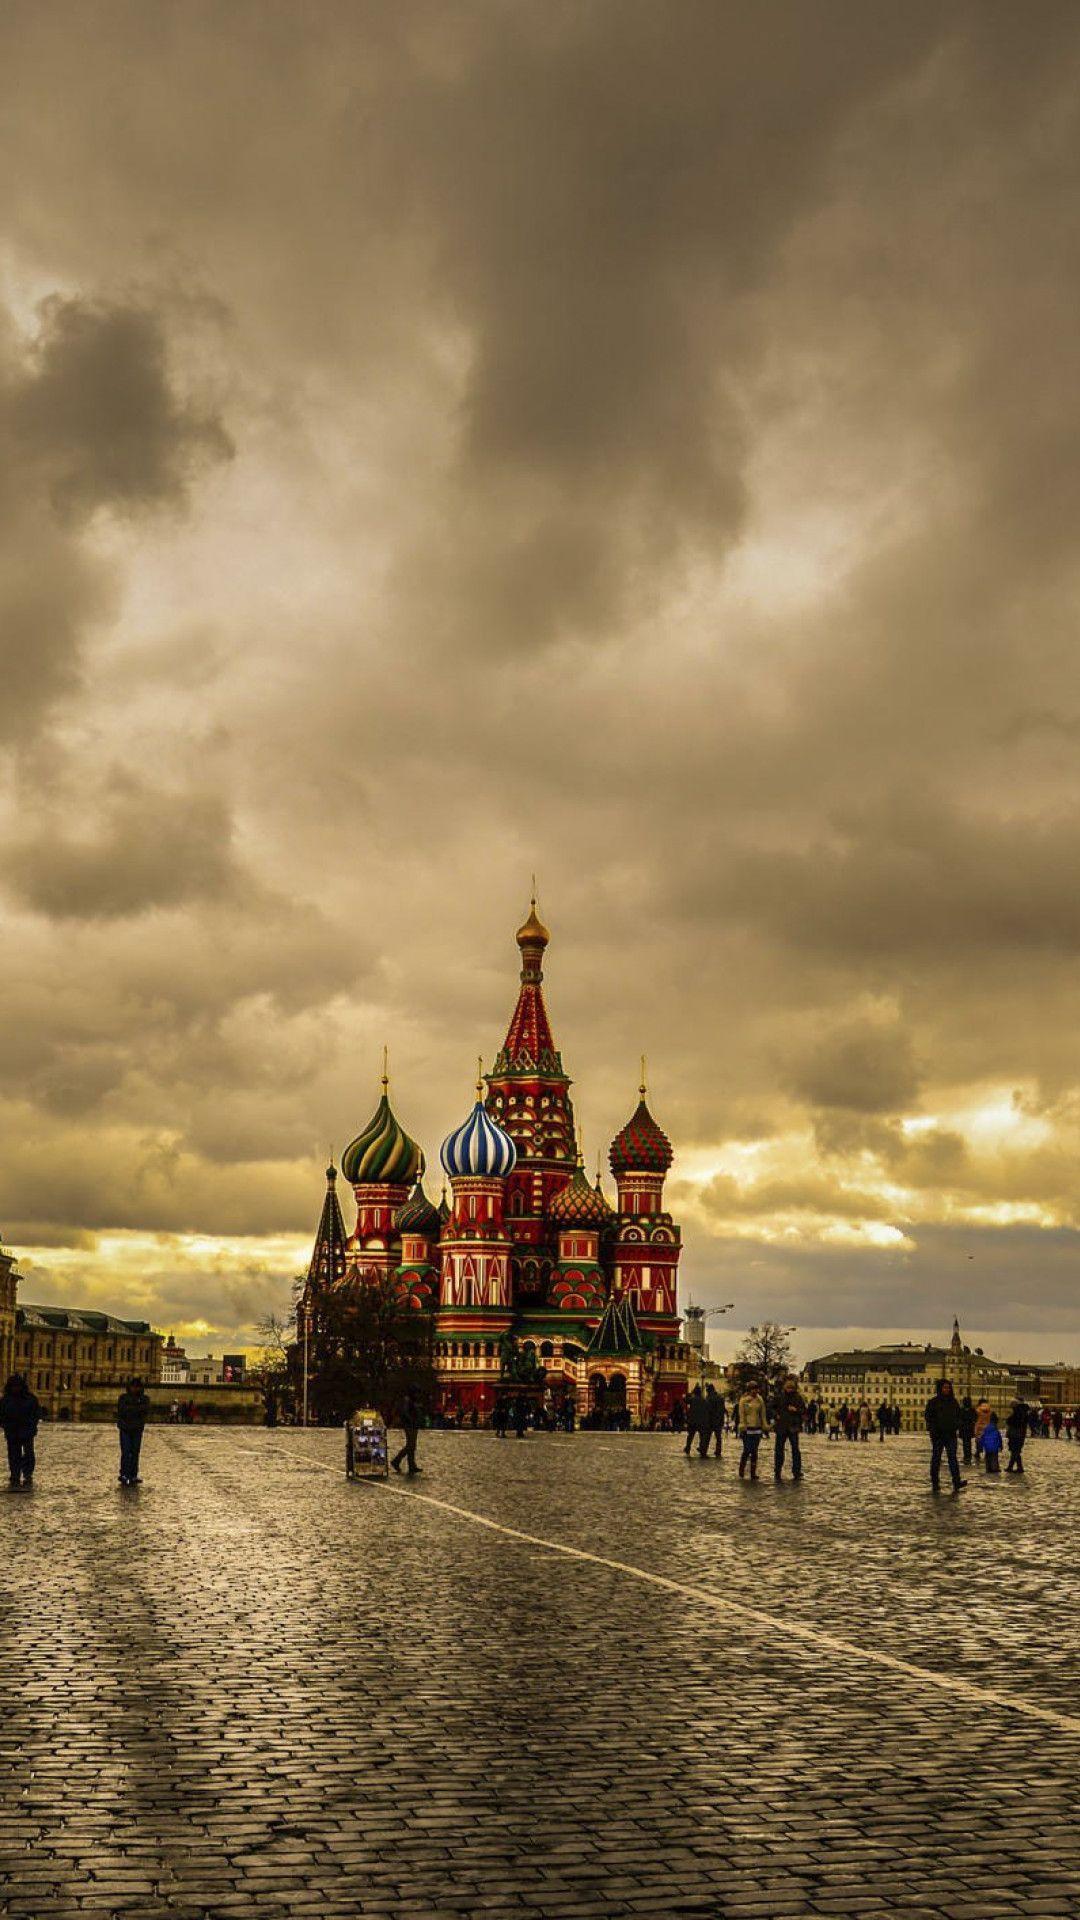 Moscow Wallpaper for iPhone iPhone 7 plus, iPhone 6 plus